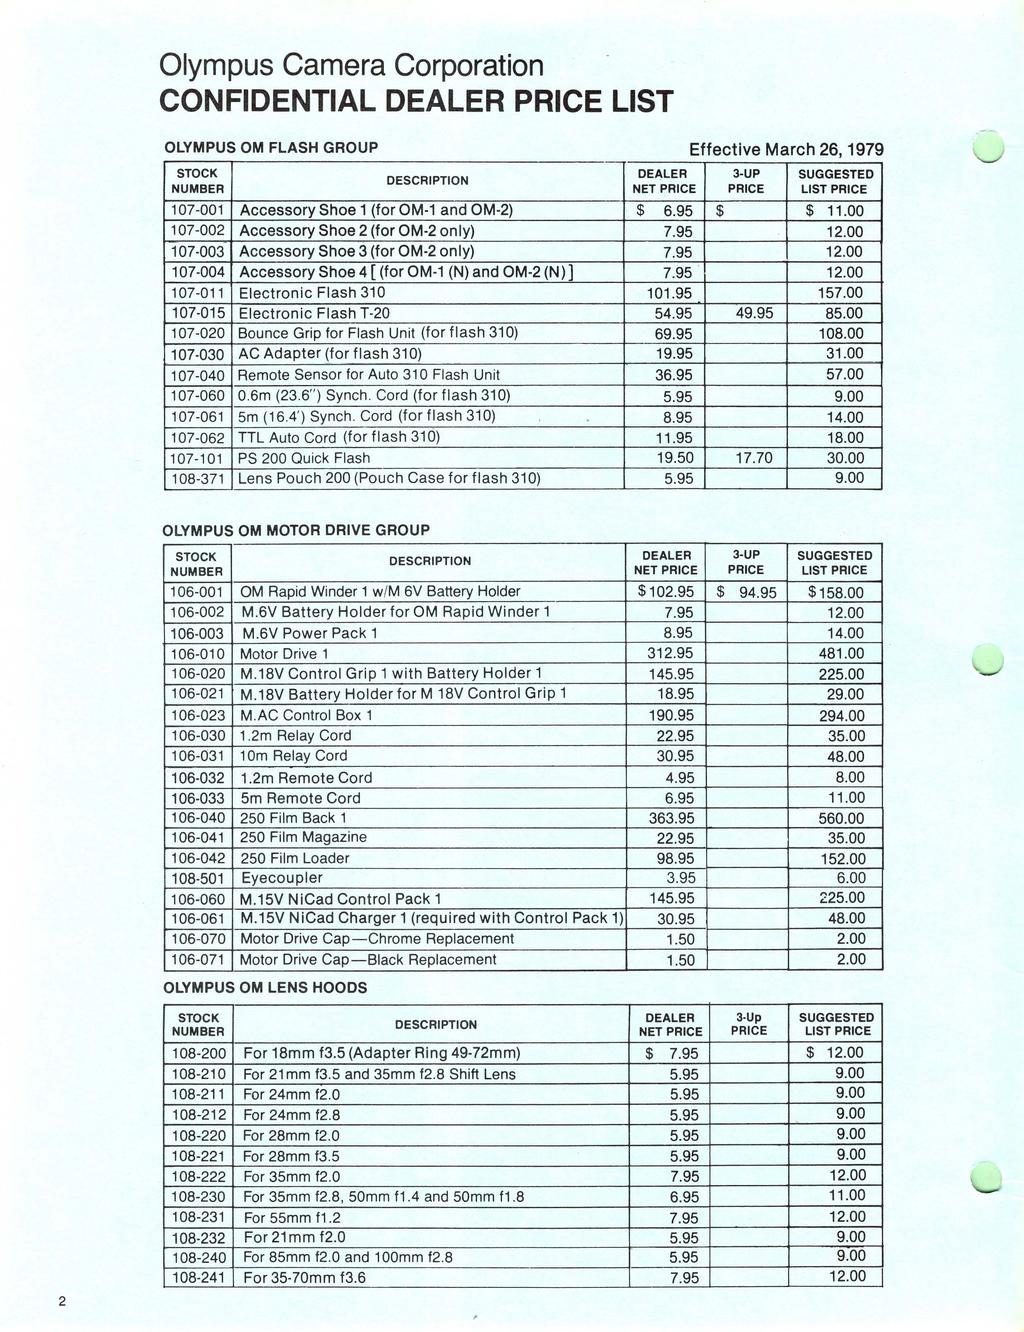 CONFIDENTIAL DEALER PRICE LIST OLYMPUS OM FLASH GROUP Effective March 26,1979 DEALER 3-UP NET PRICE PRICE 107-001 Accessory Shoe 1 (for OM-1 and OM-2) $ 6.95 $ $ 11.